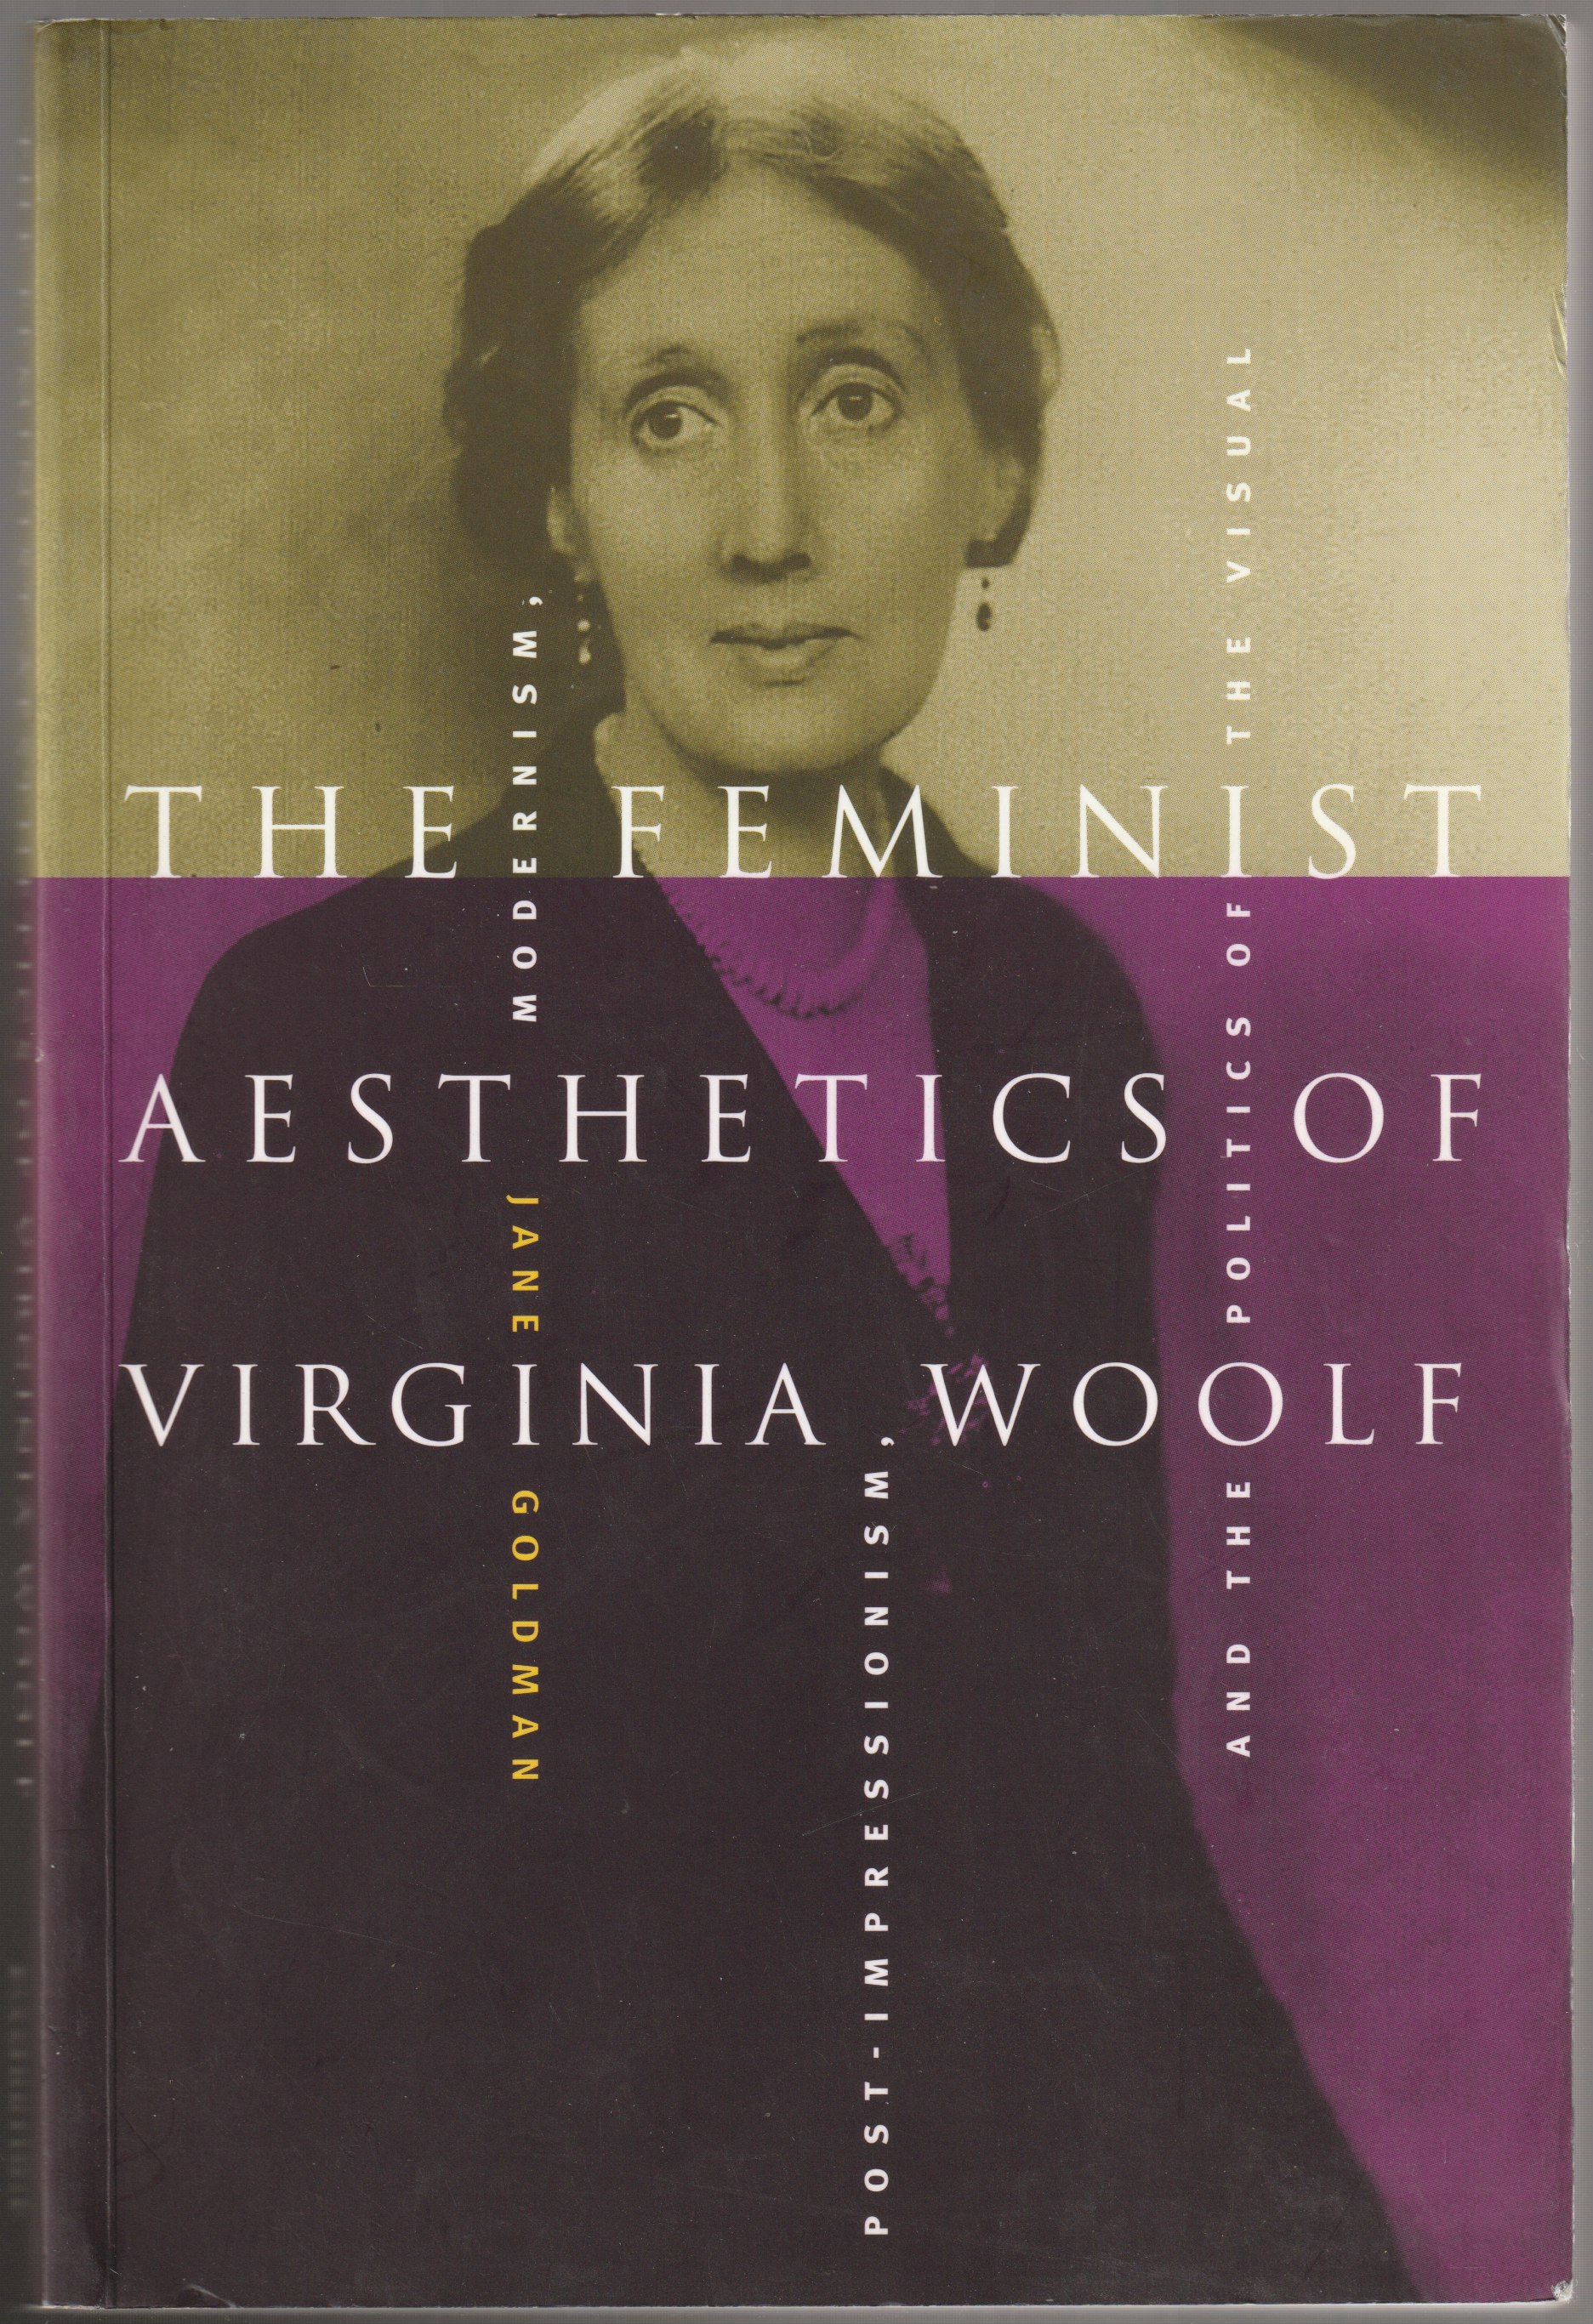 The feminist aesthetics of Virginia Woolf : modernism, post-impressionism and the politics of the visual.